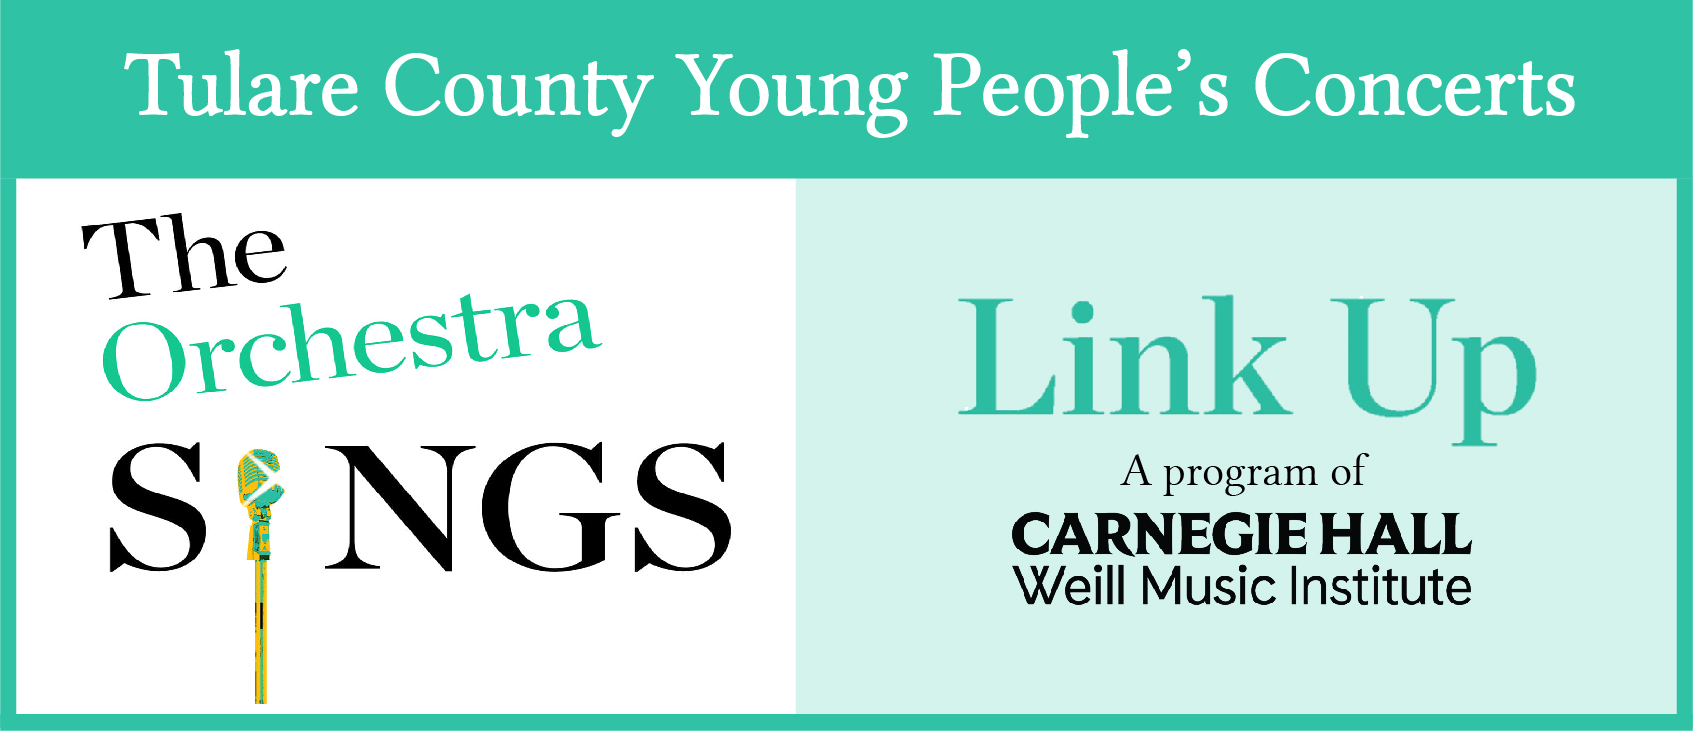 Link Up Orchestra Sings Logo - Image Text: Tulare County Young People's Concerts, The Orchestra Sings, Link Up - A program of Carnegie Hall Weill Music Institute